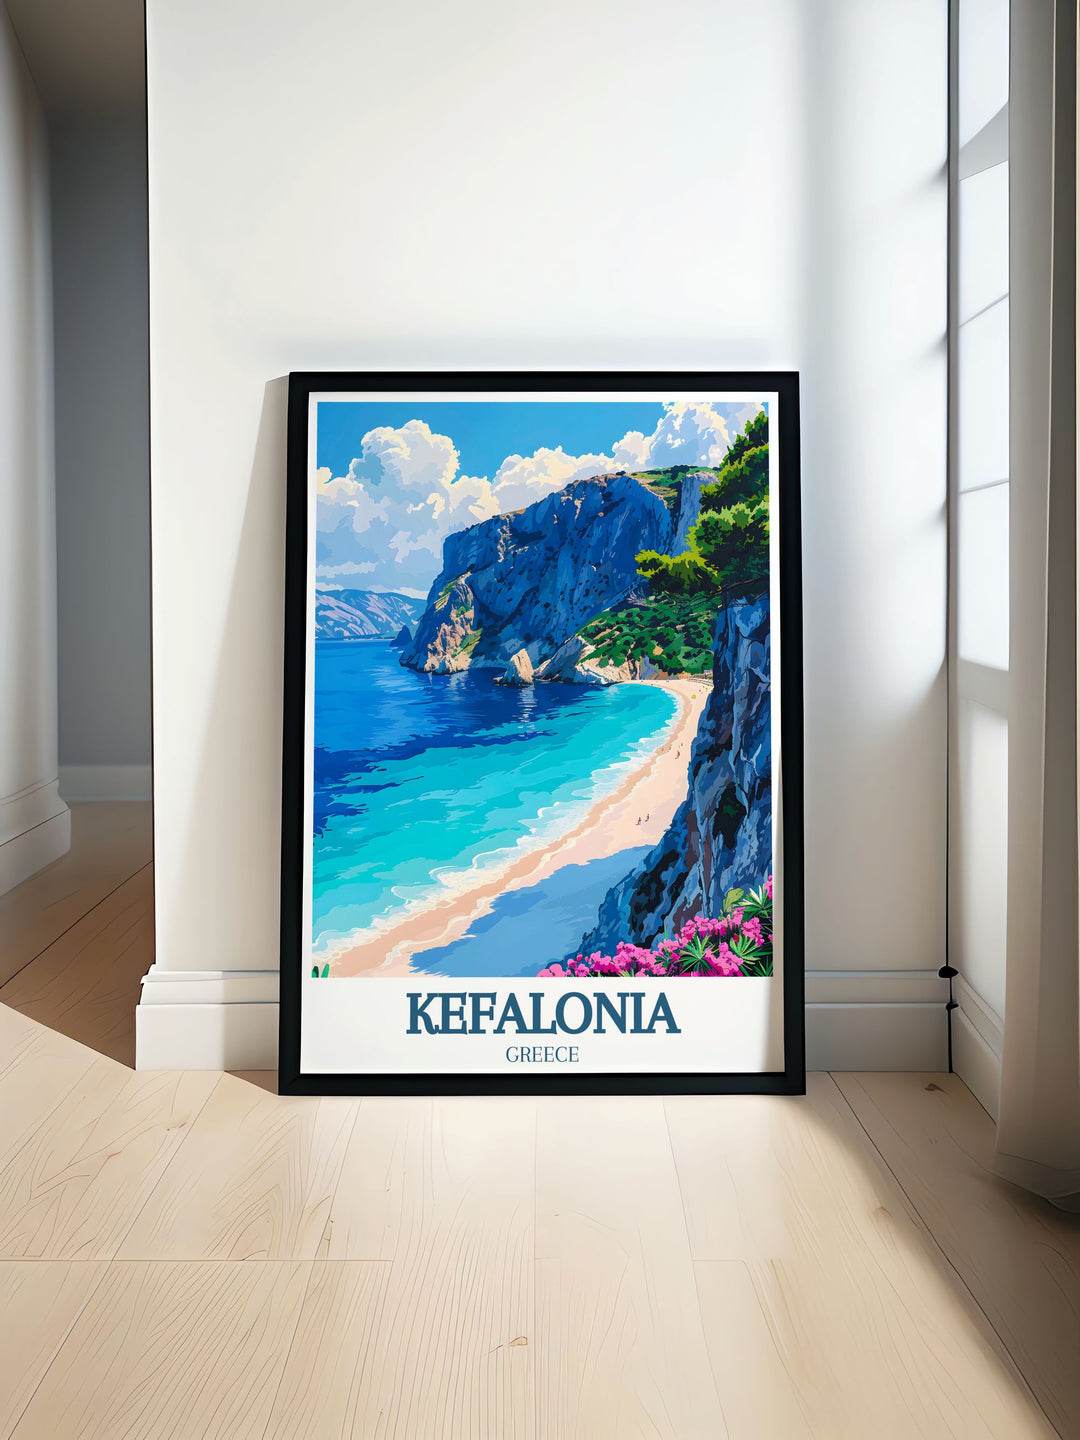 A vibrant travel print featuring Myrtos Beach, emphasizing its pristine beauty and tranquil ambiance. The colorful illustration celebrates the natural splendor and iconic status of this famous beach.